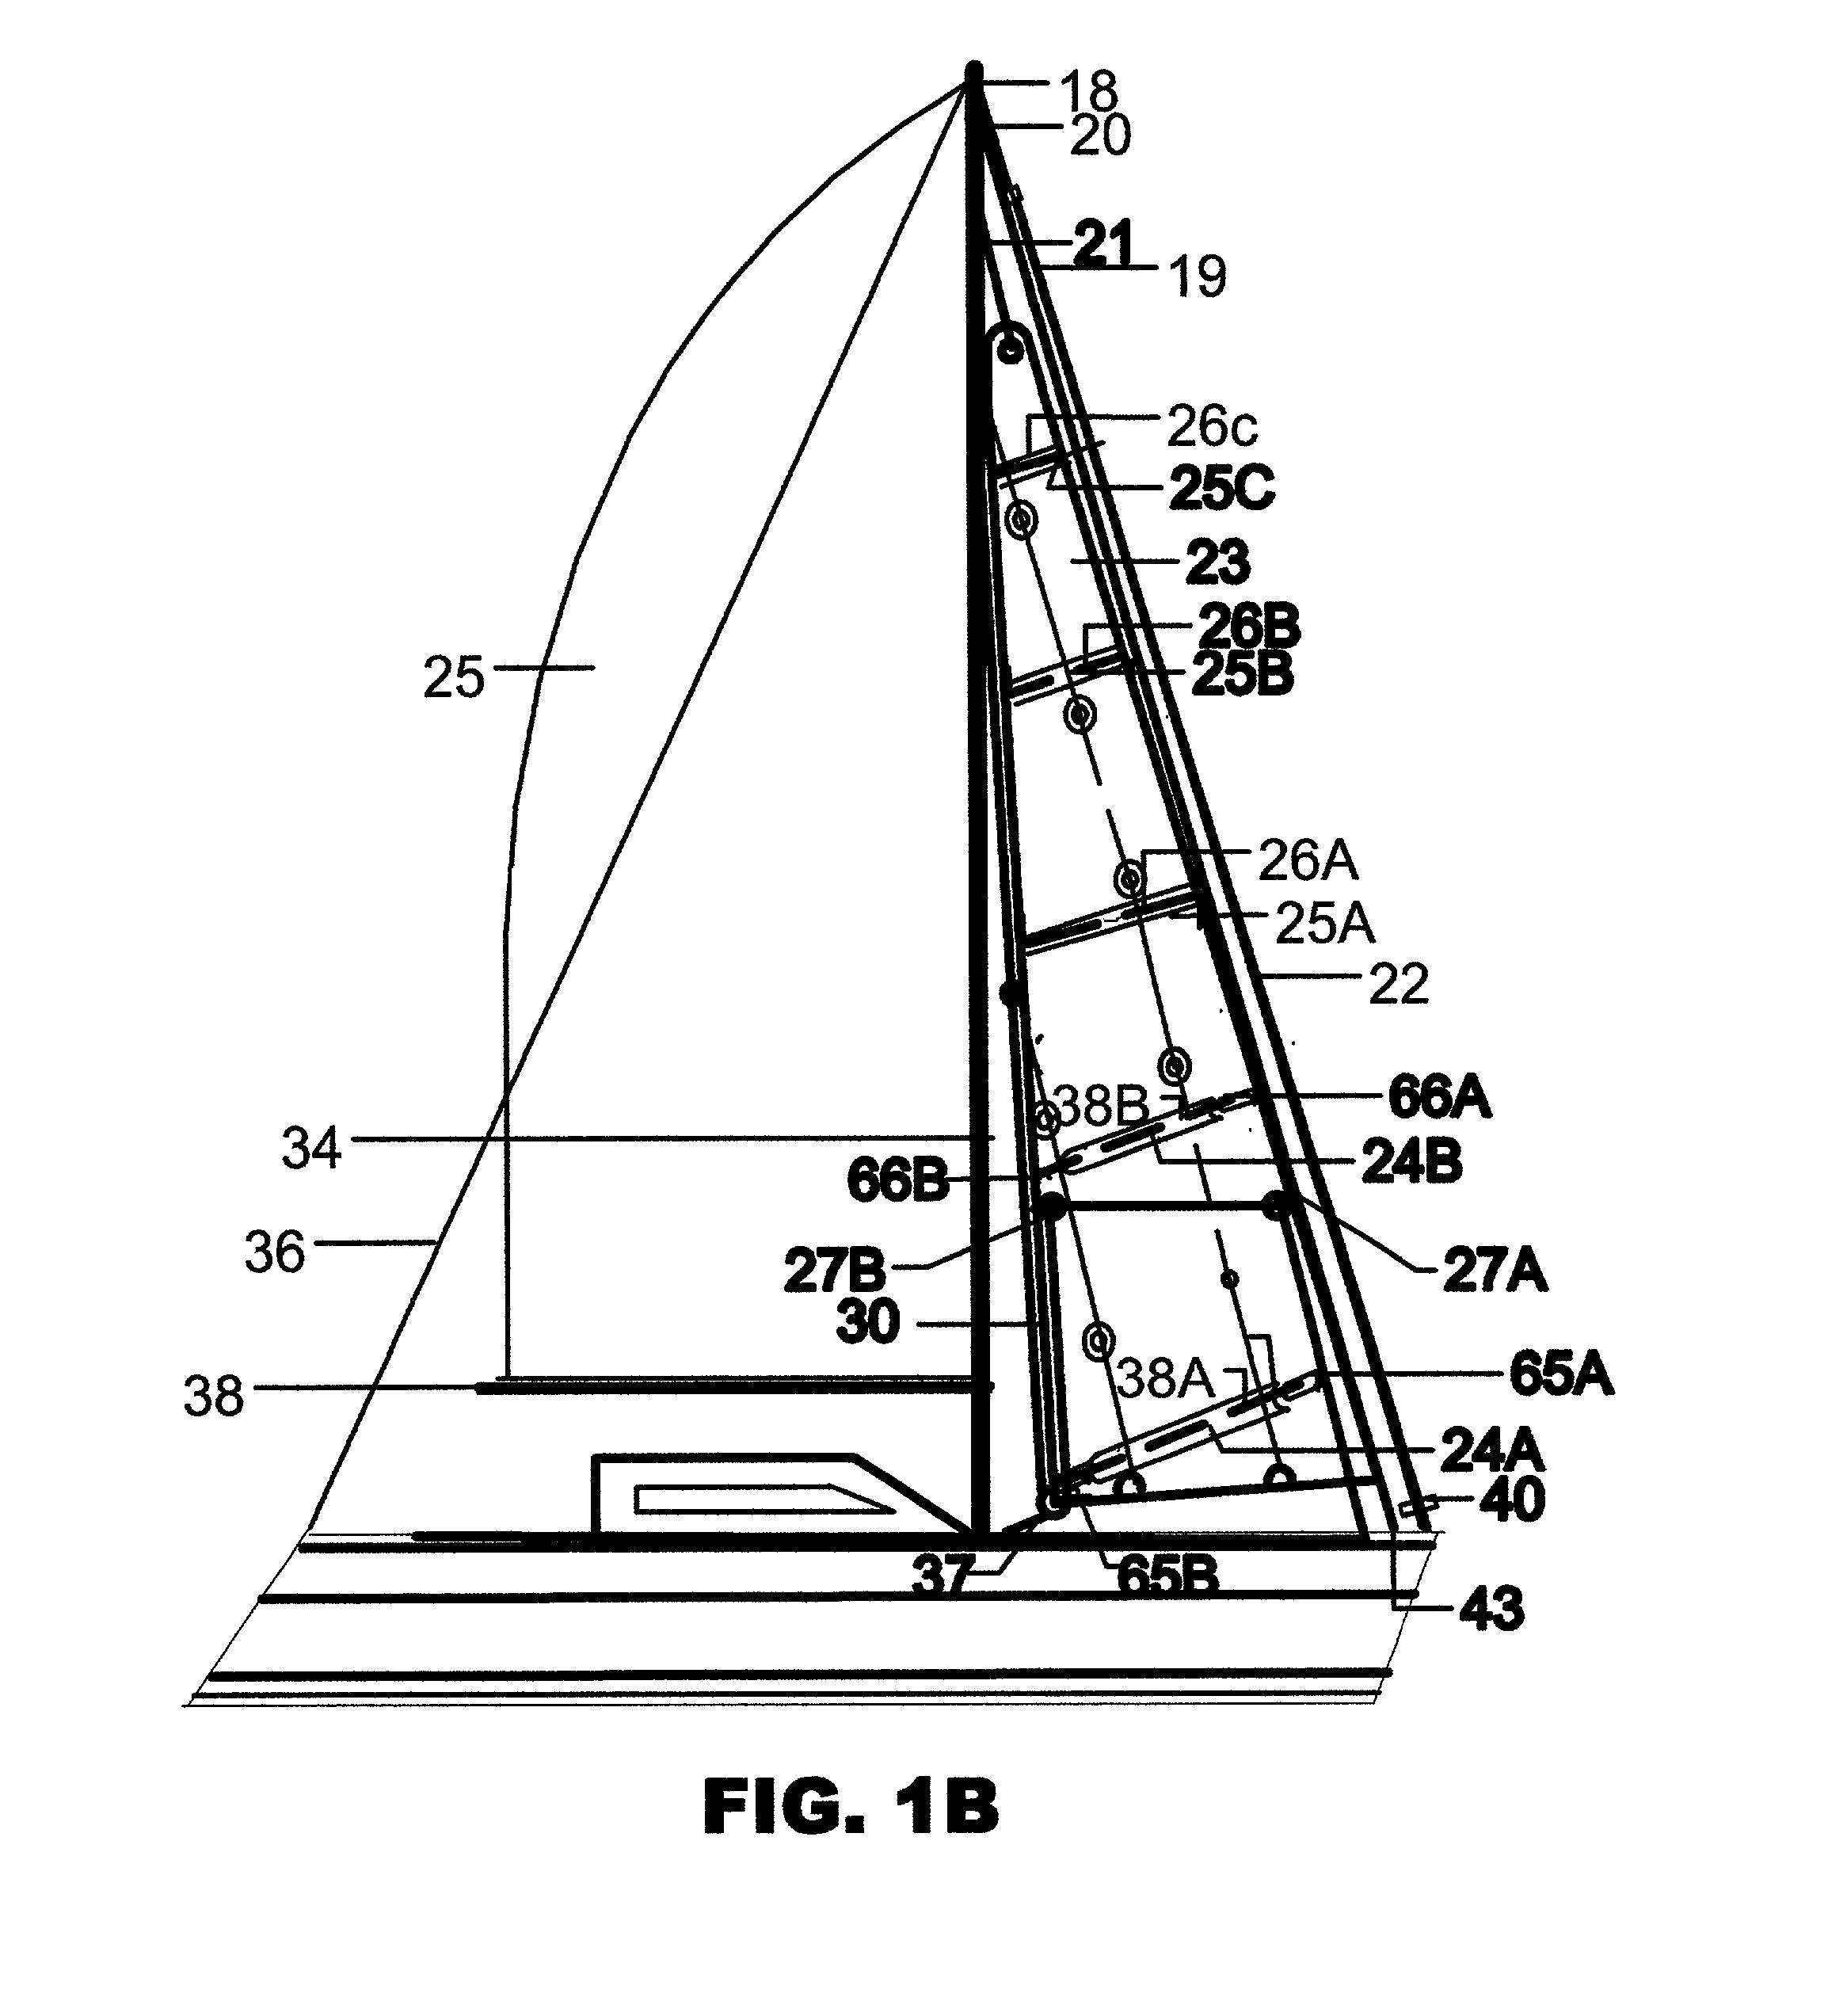 Semi-elliptical sail system for wind-propelled vehicles